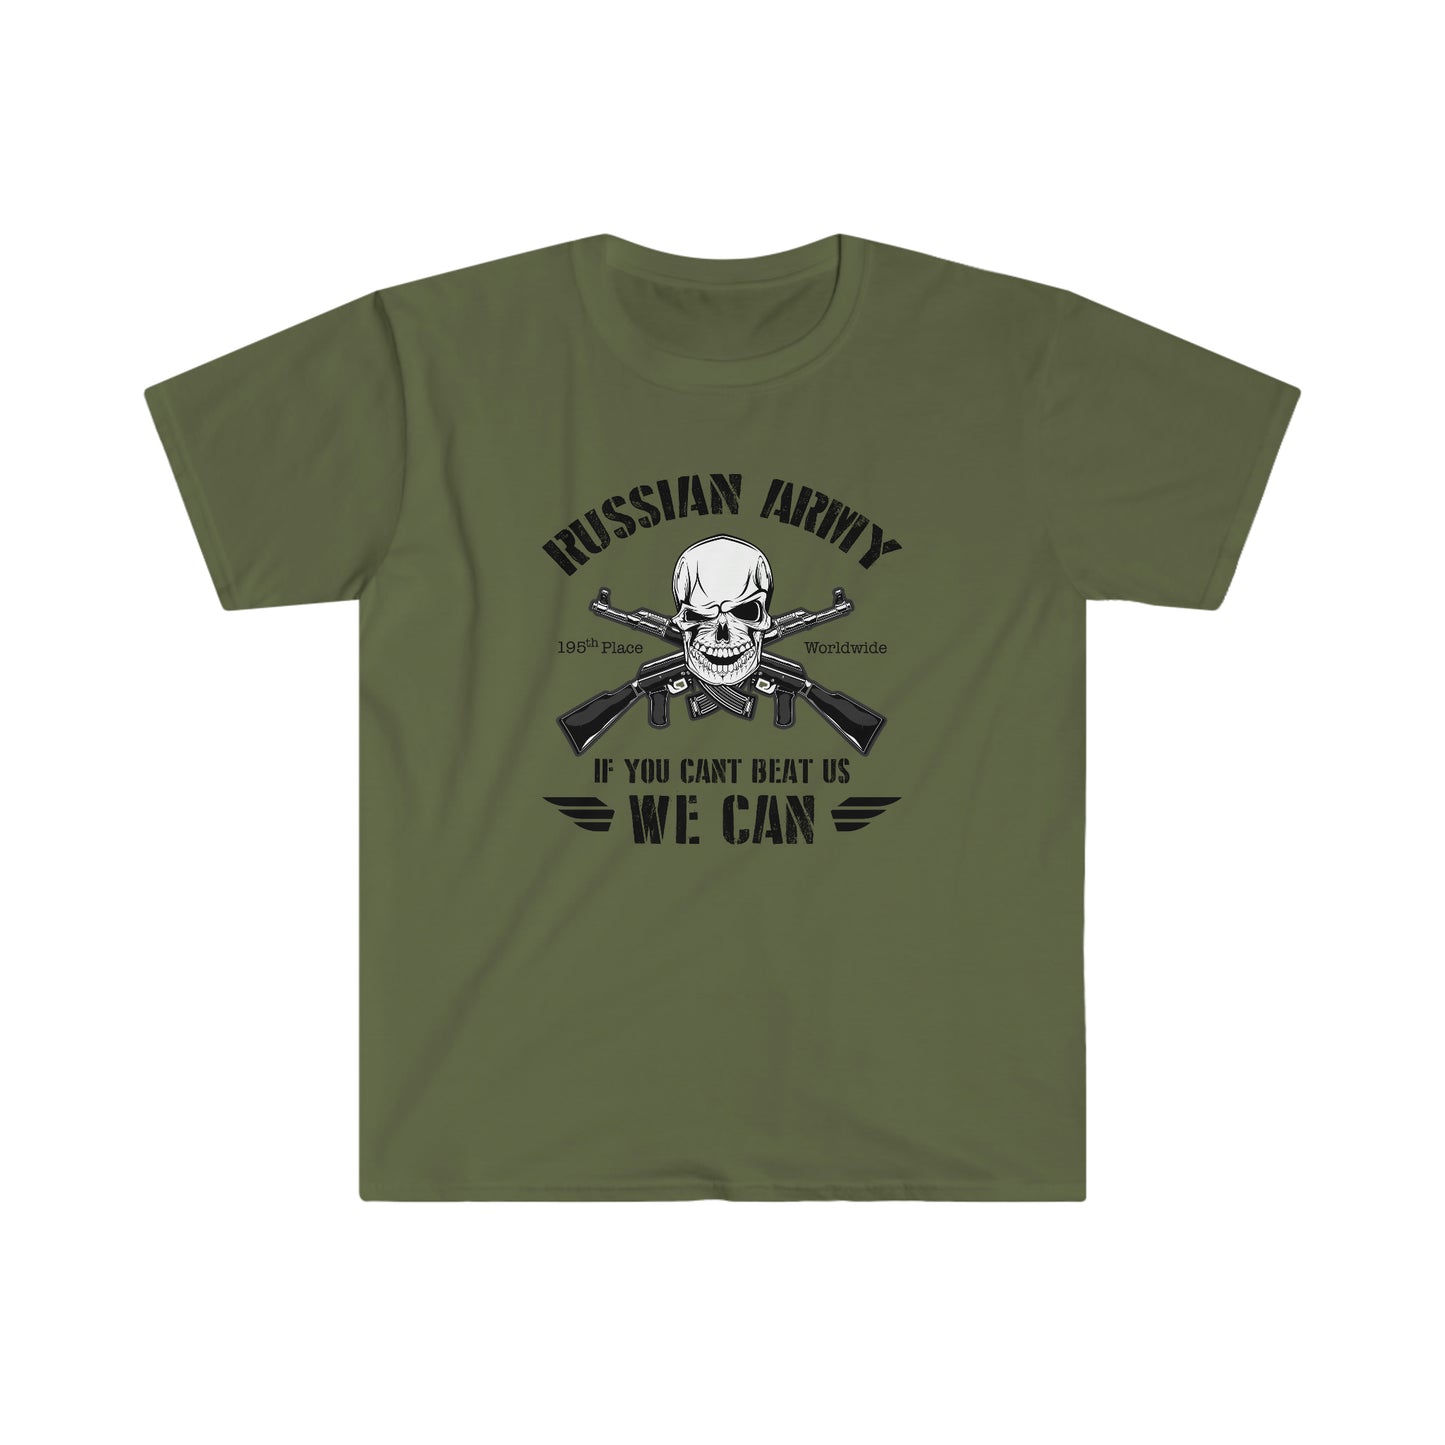 Russian Army "We Can" T-shirt